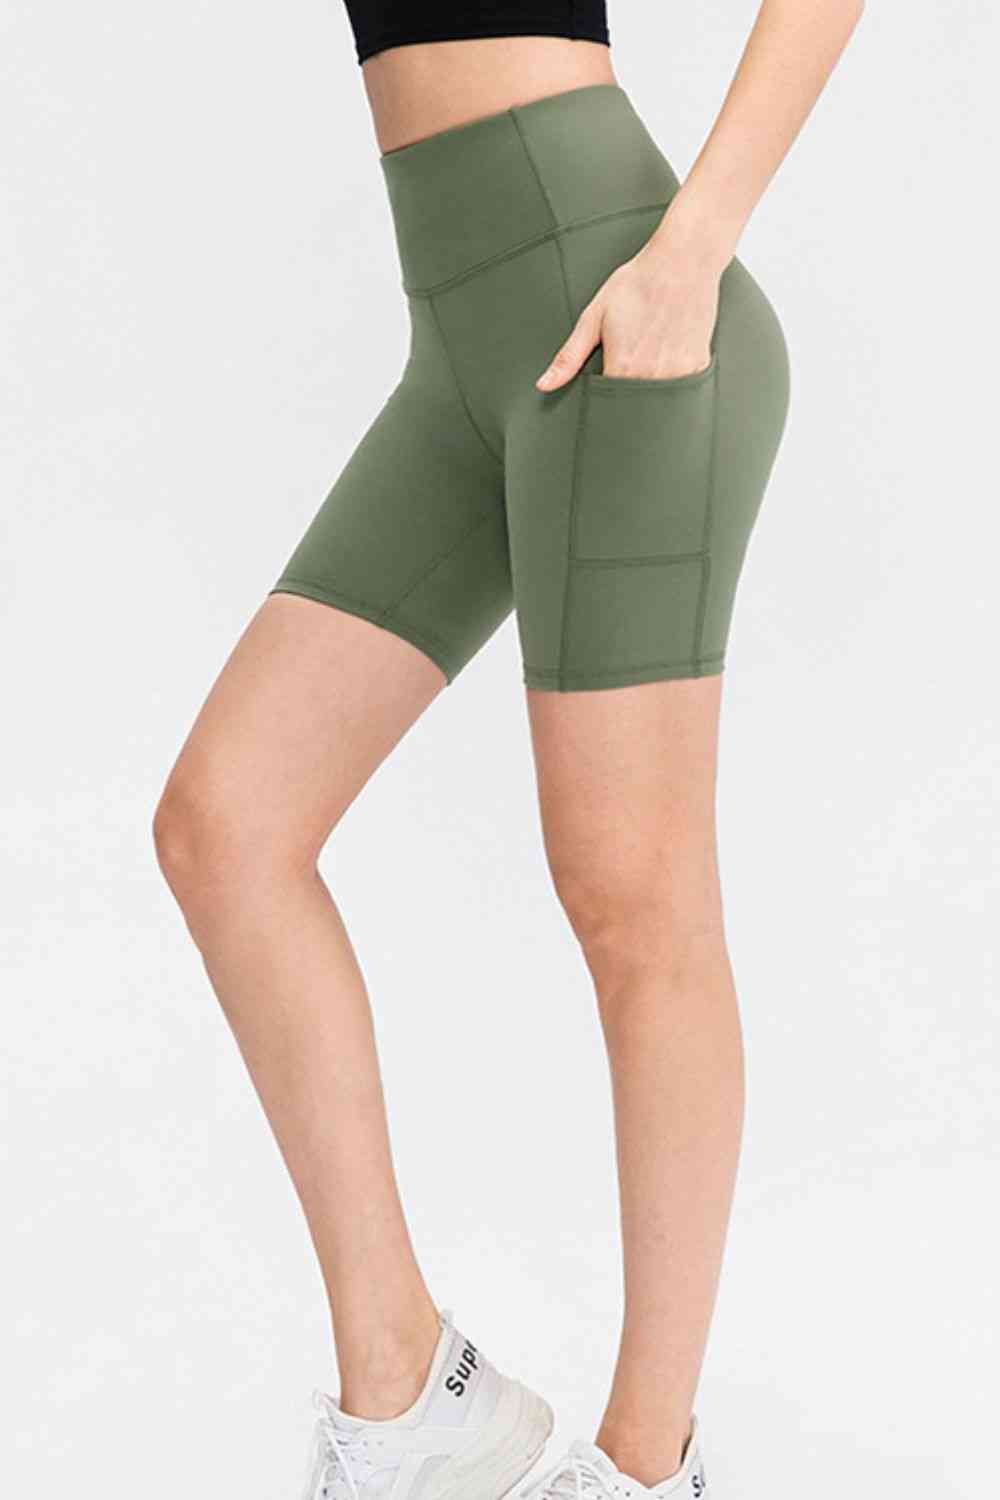 Wide Waistband Sports Shorts with Pockets -  - Wild Willows Boutique - Massapequa, NY, affordable and fashionable clothing for women of all ages. Bottoms, tops, dresses, intimates, outerwear, sweater, shoes, accessories, jewelry, active wear, and more // Wild Willow Boutique.